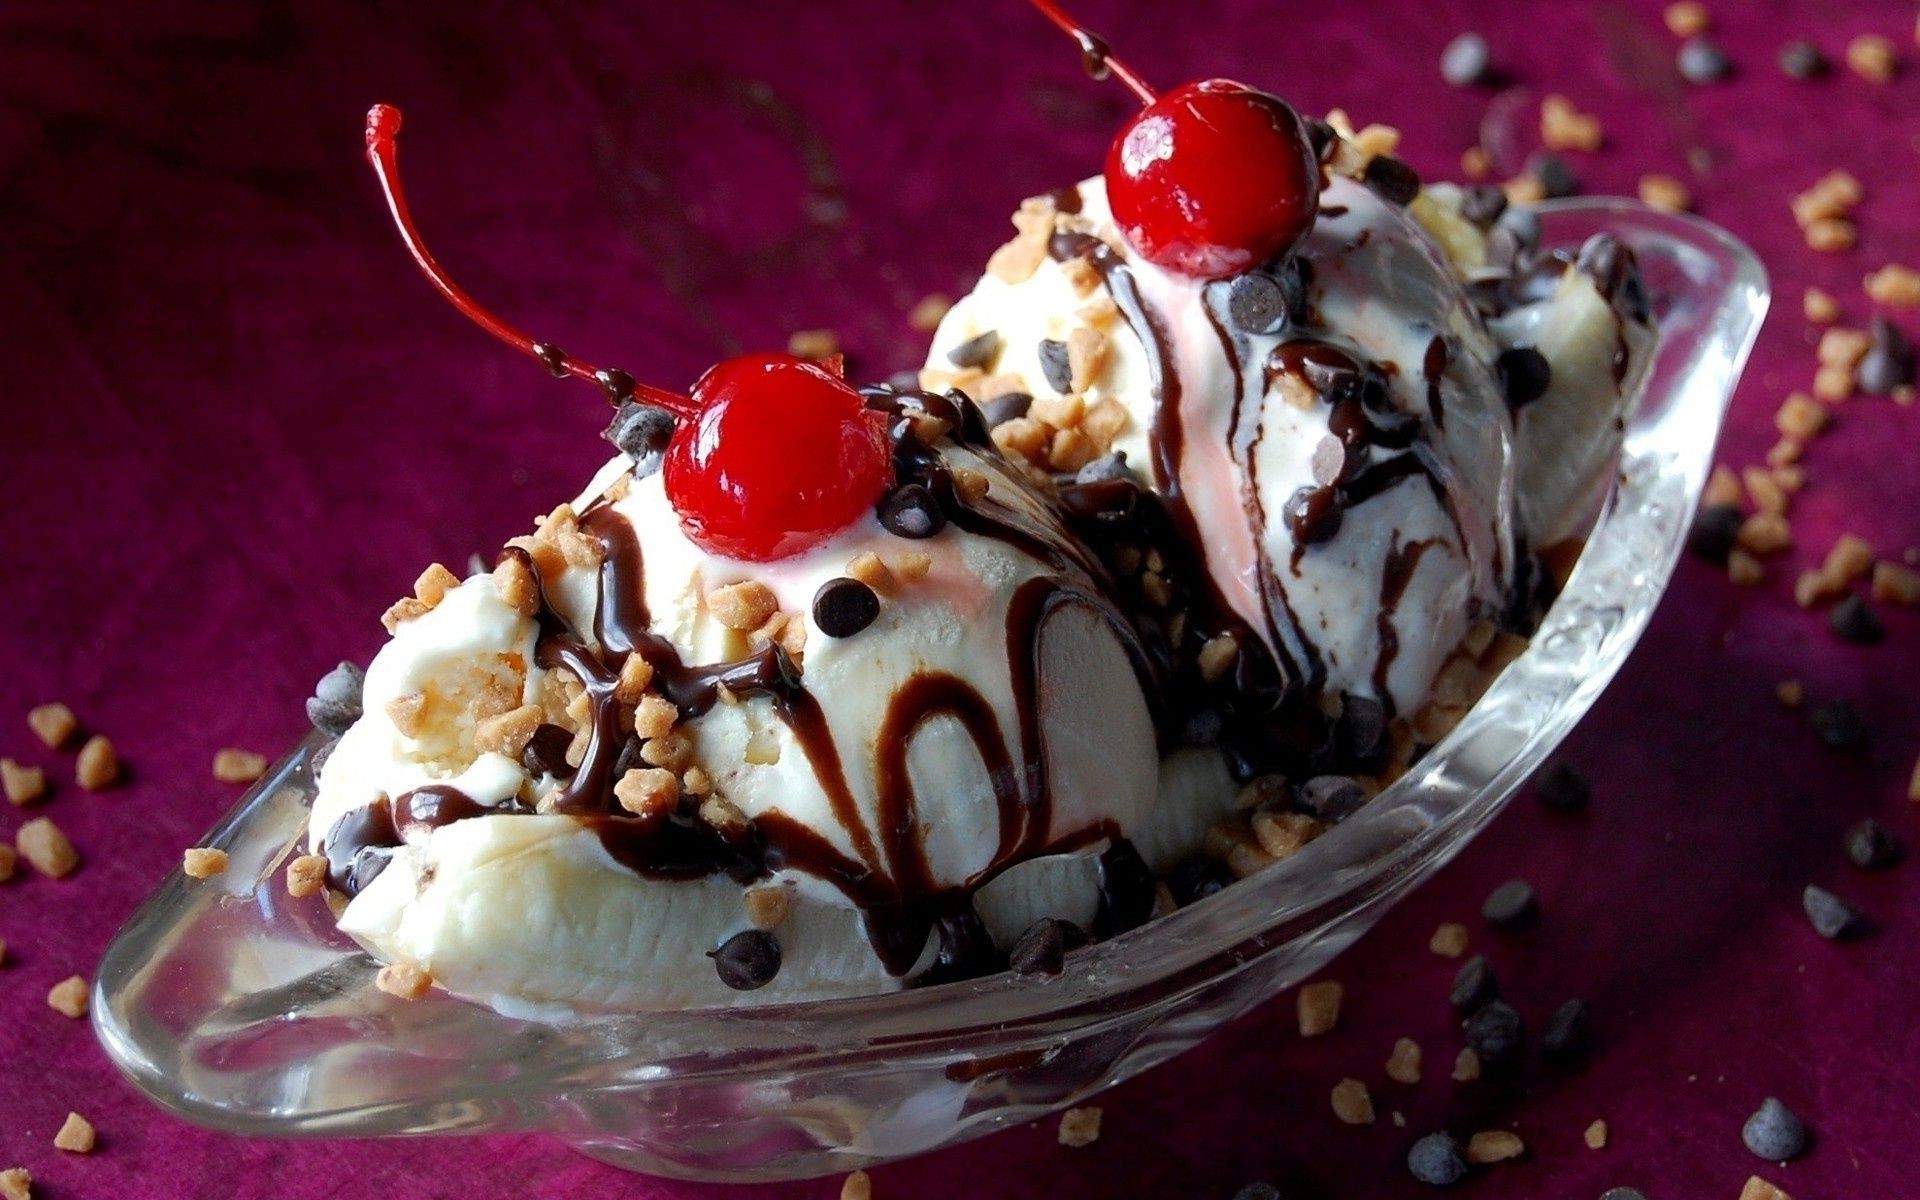 food & drink cream sweet chocolate scoop frozen vanilla ice fruit creamy food goody berry dairy product delicious syrup cherry strawberry wafer cold